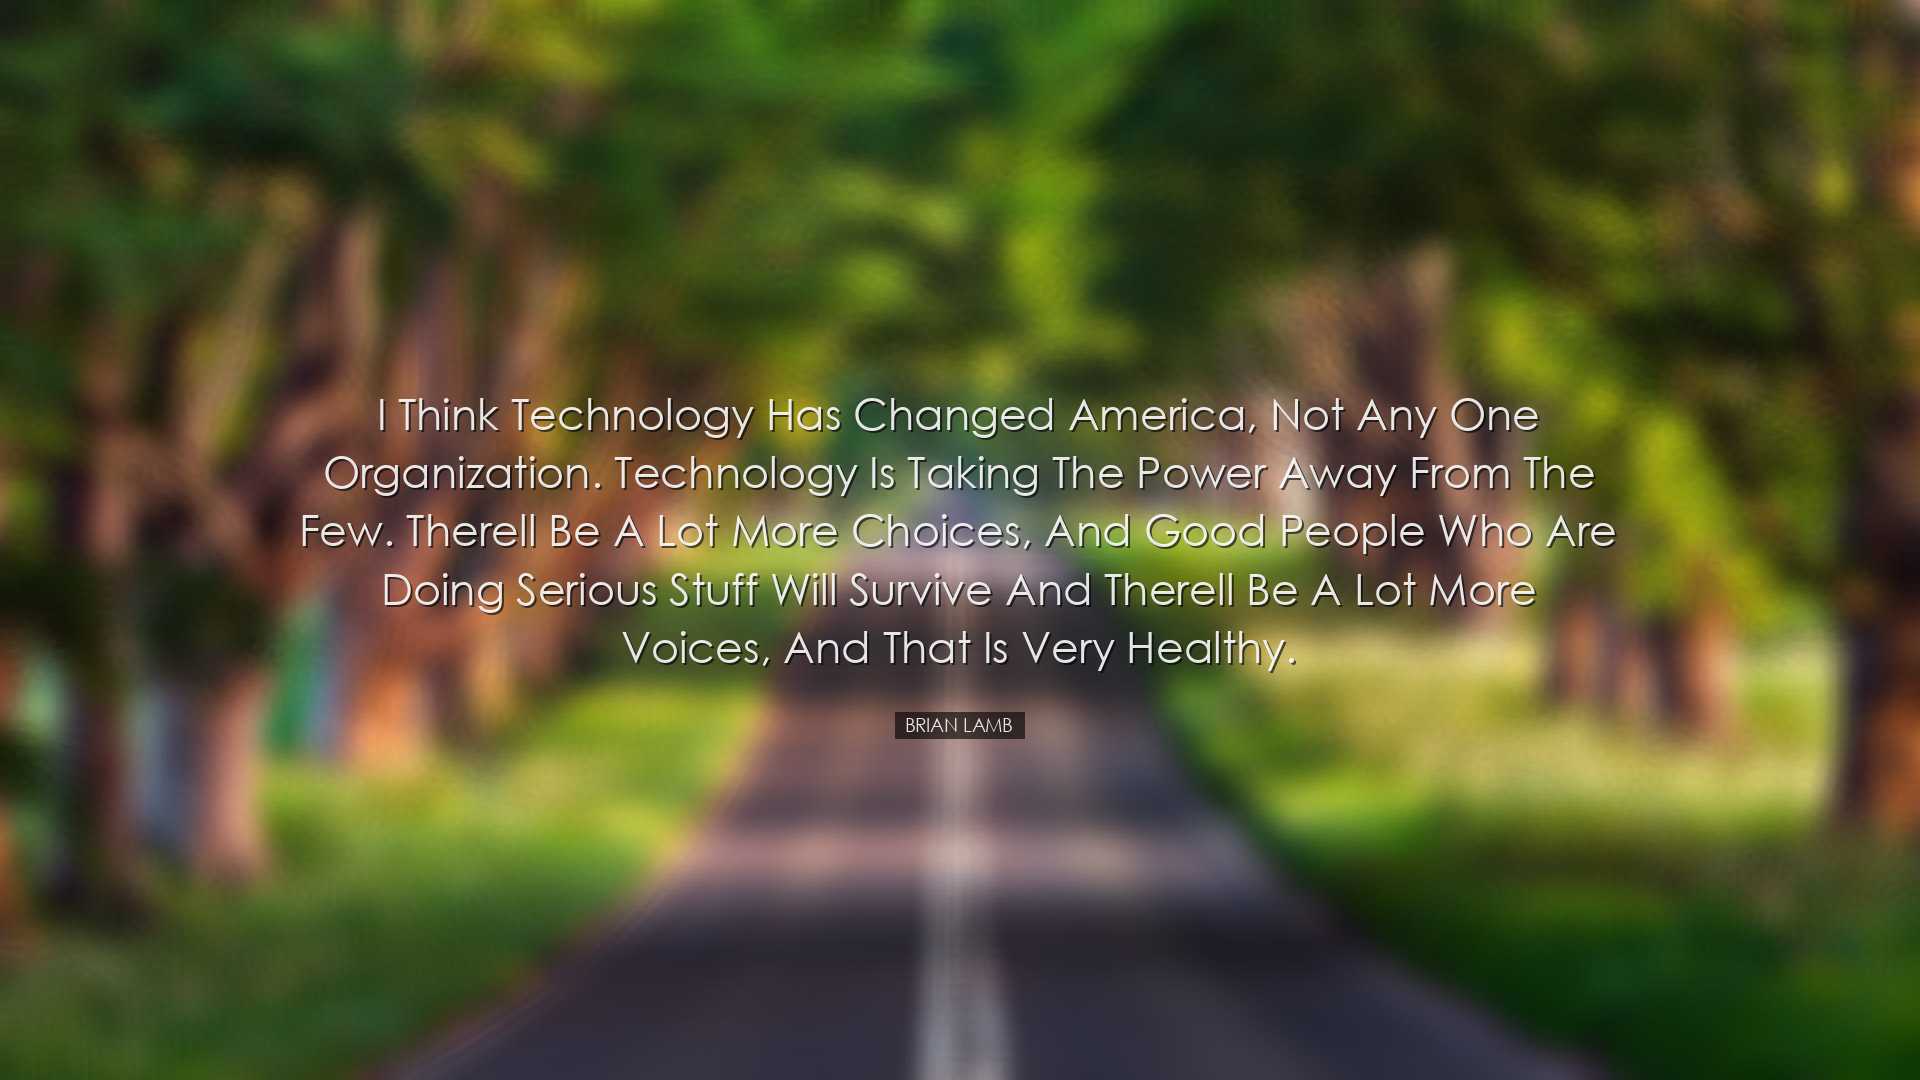 I think technology has changed America, not any one organization.